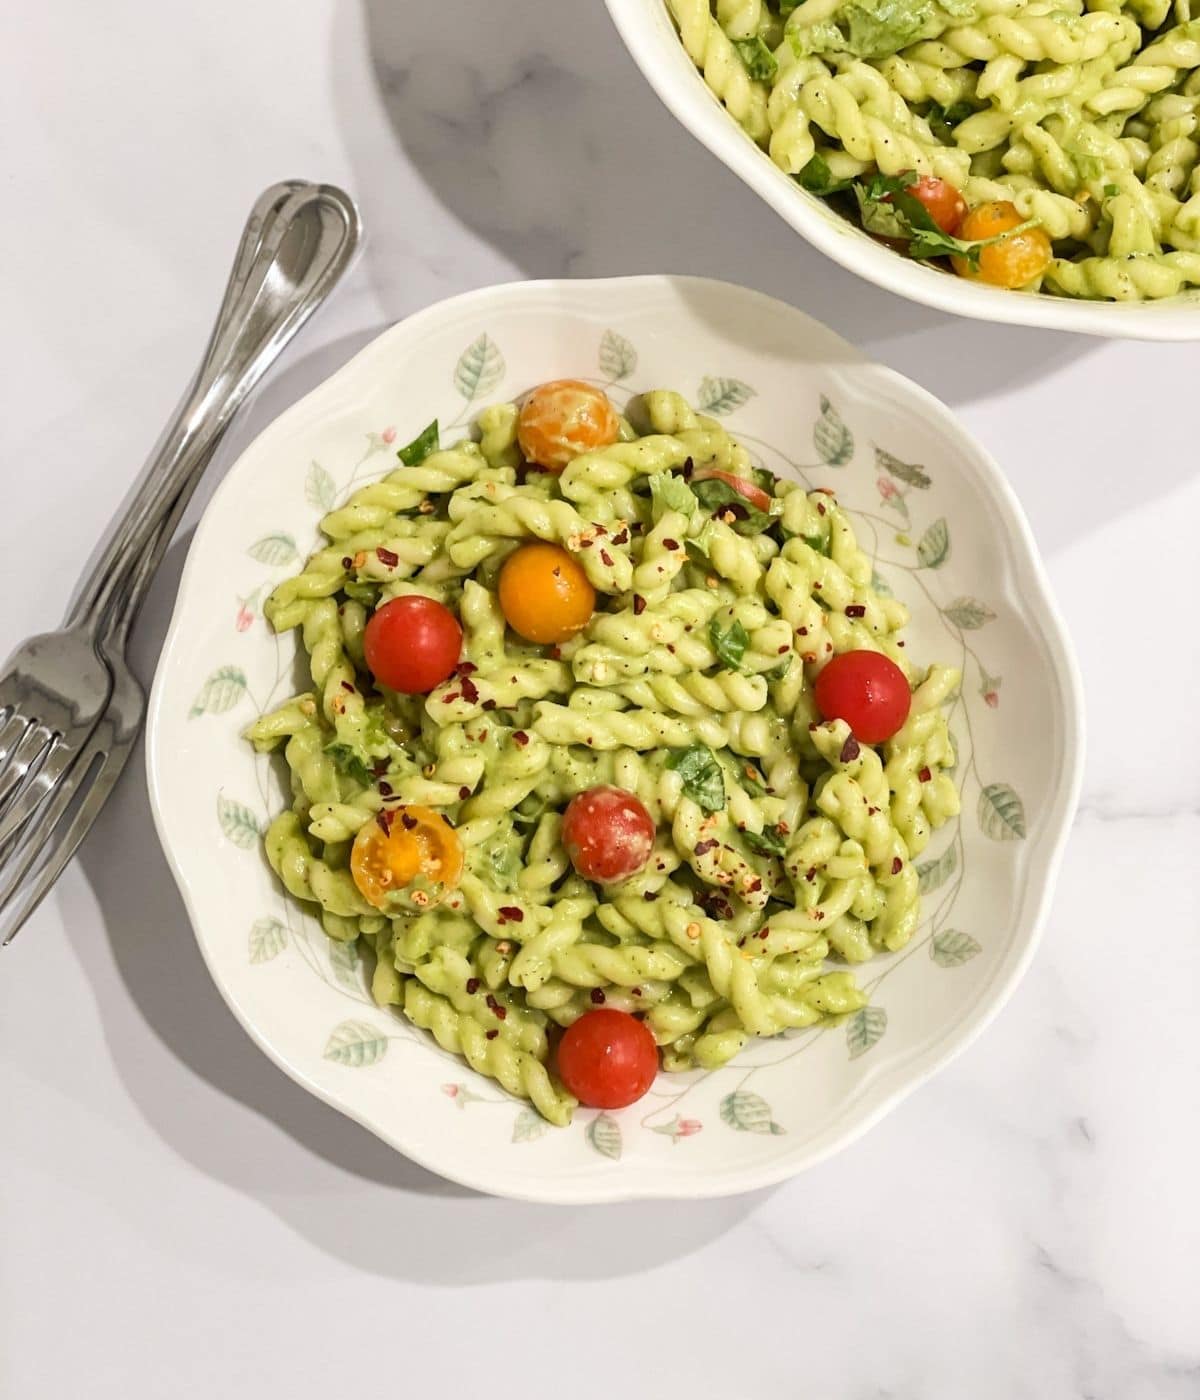 A plate is filled with avocado pasta and topped with cherry tomatoes.